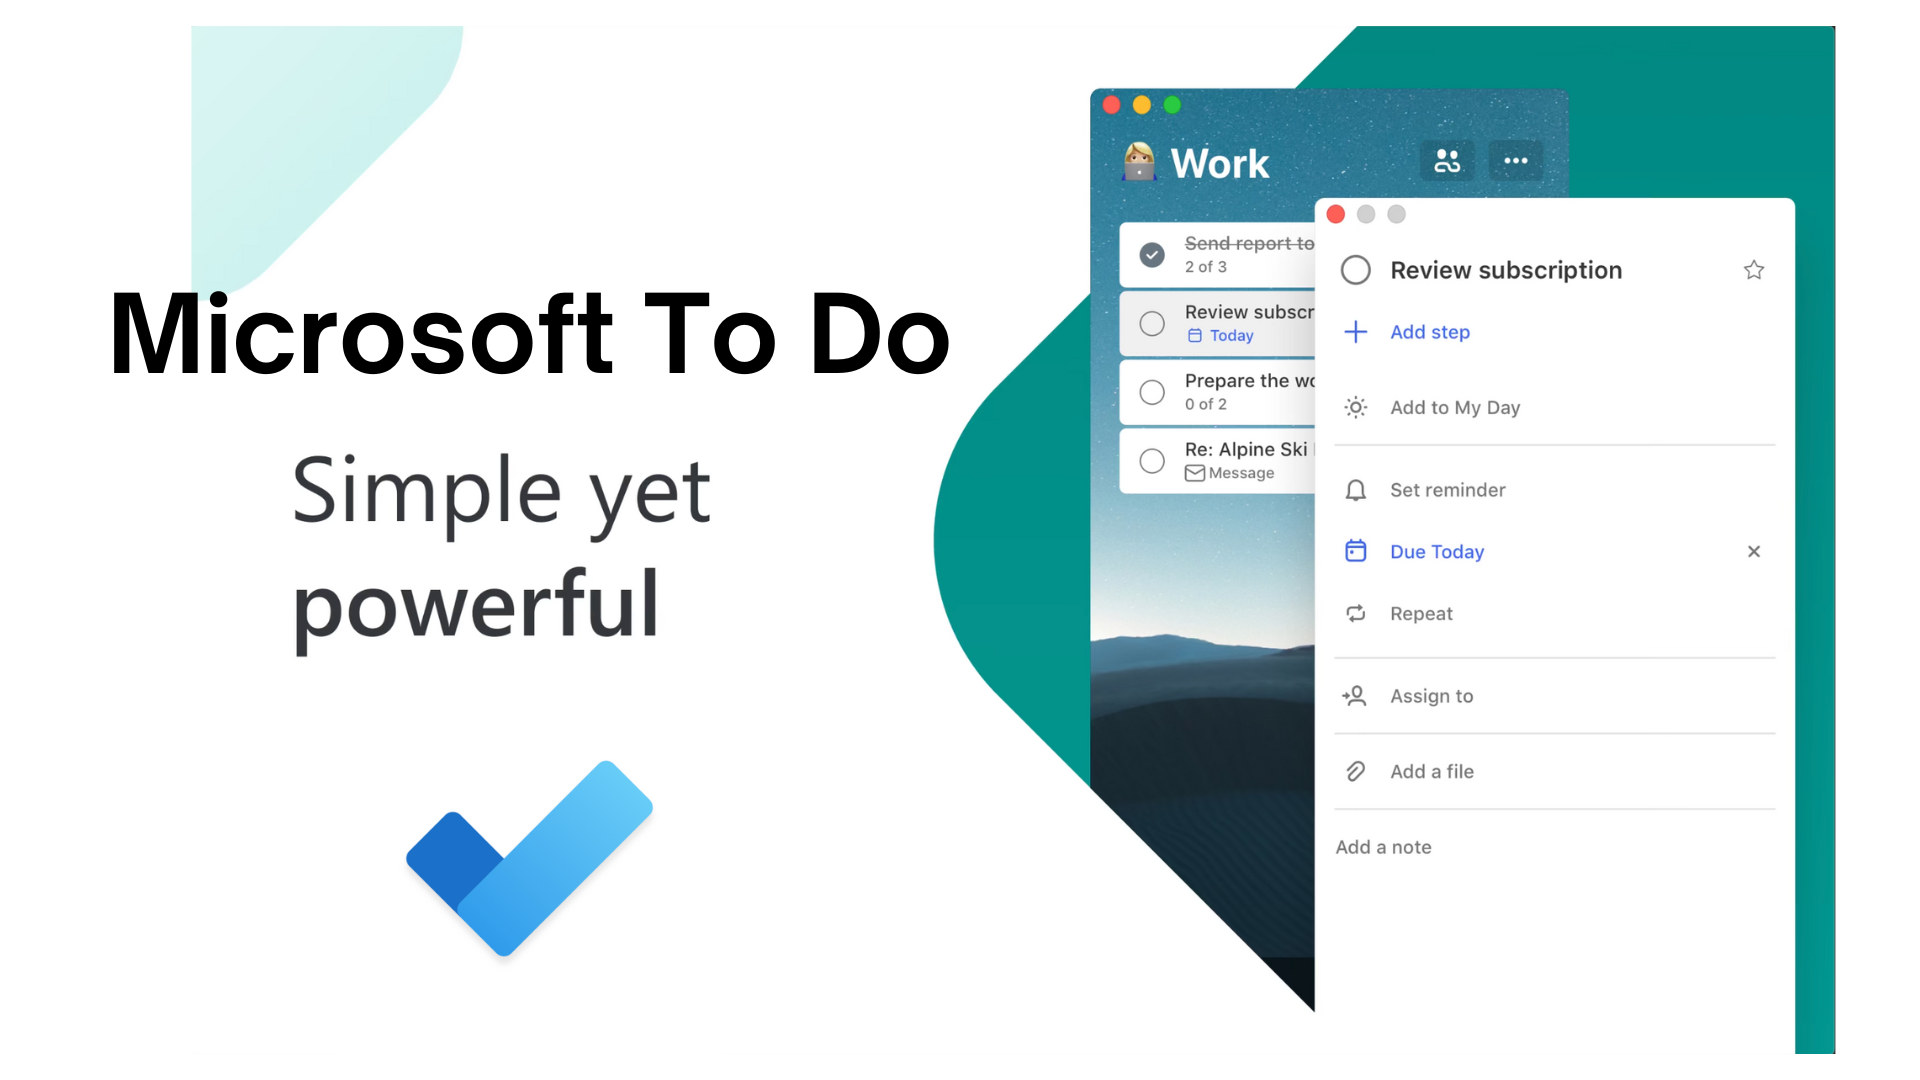 Microsoft To Do – Product Review by a Product person